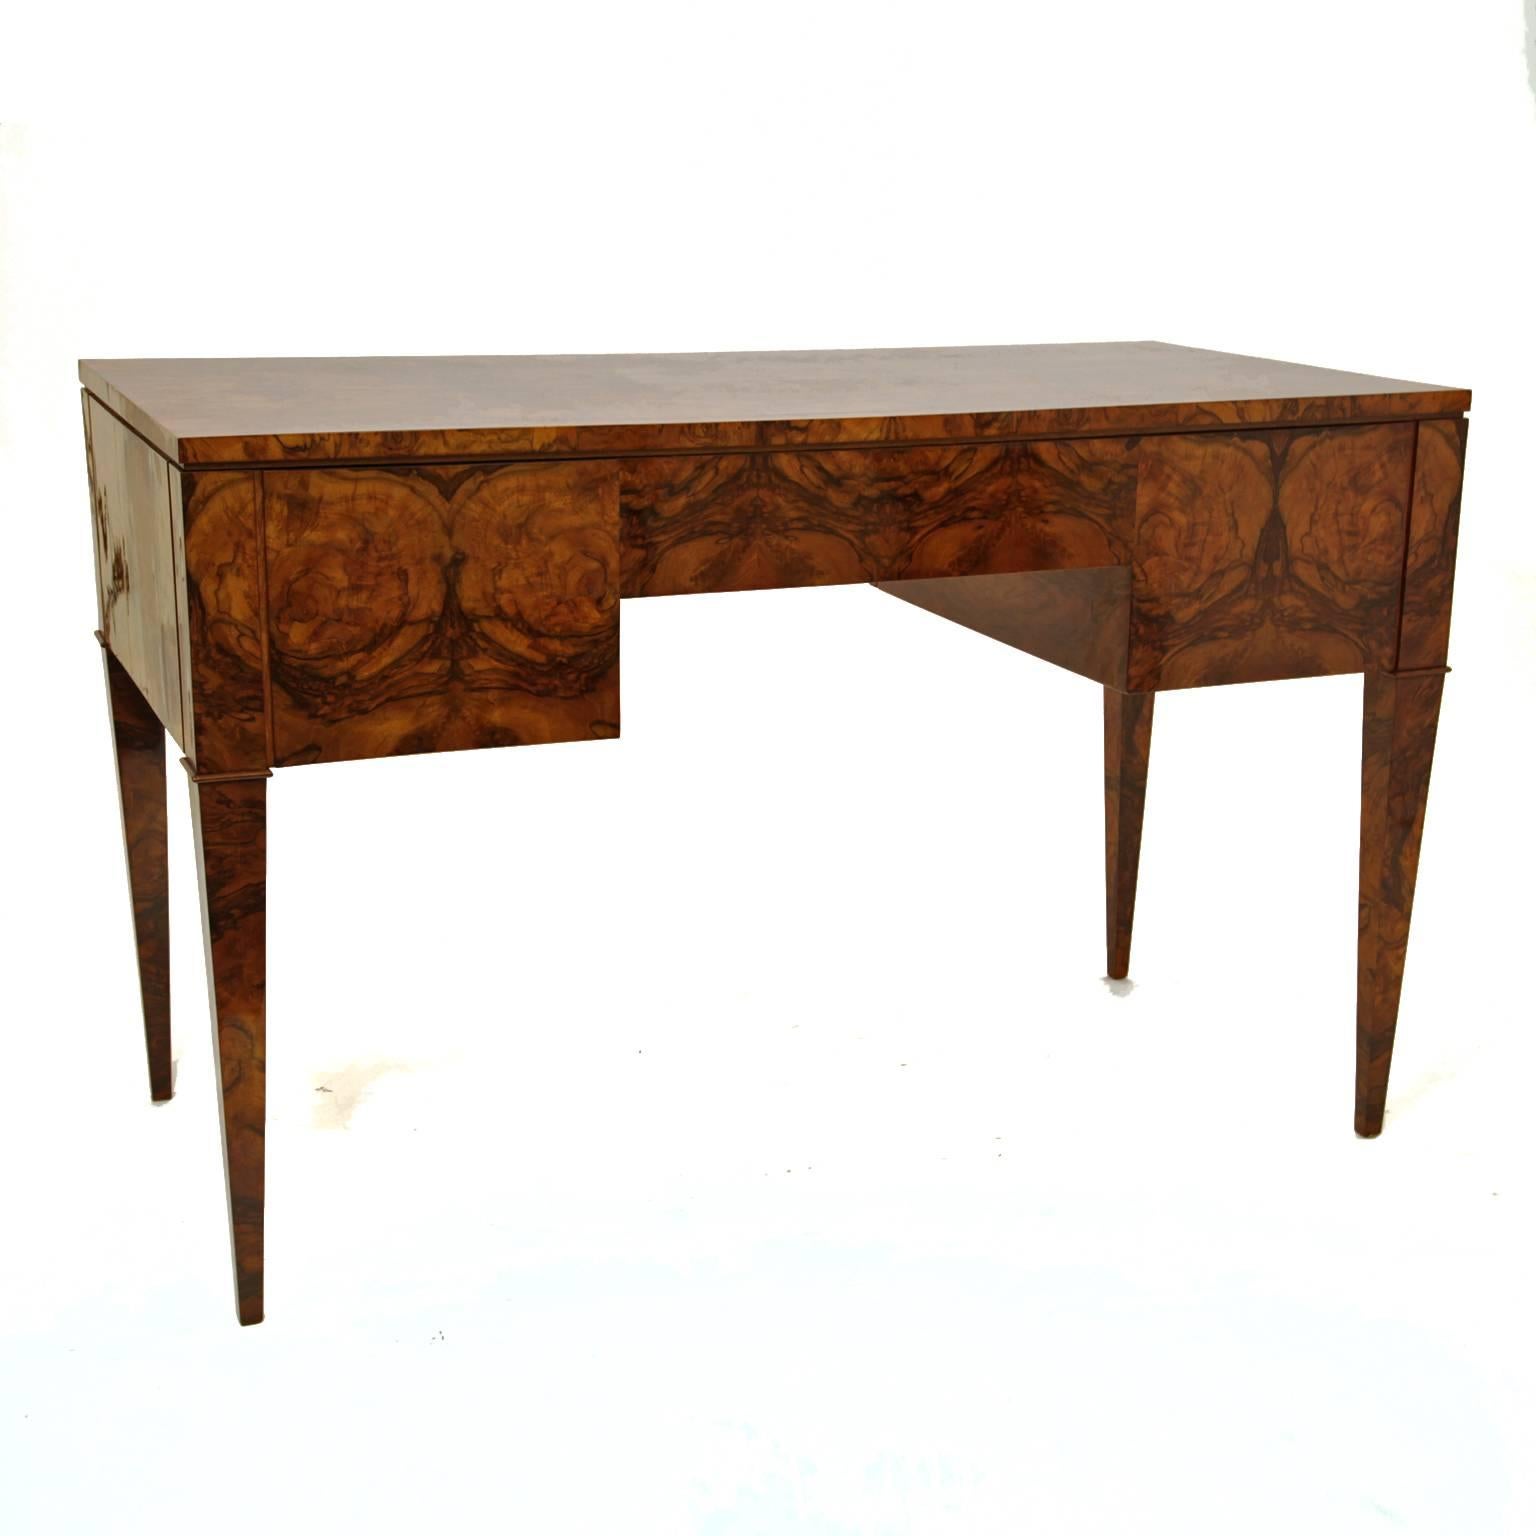 Desk with a beautiful burl wood veneer and five drawers. The desk stands on tapered feet.